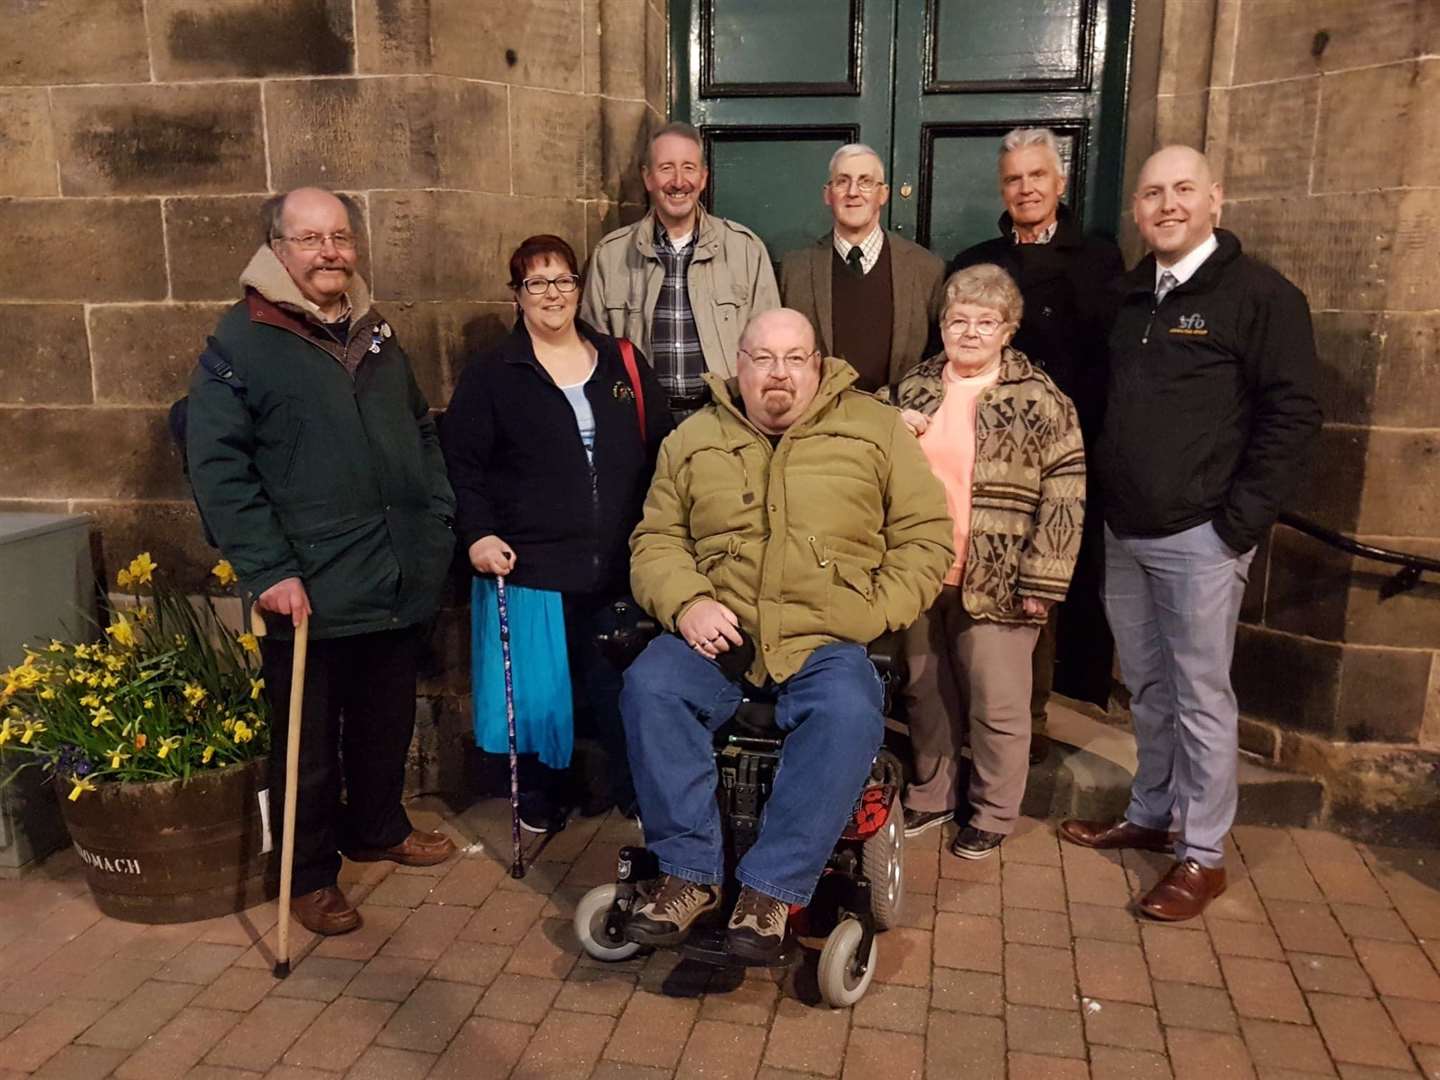 Forres Community Council's last group picture including Shaun Moat (right). Former chairman Graham Hilditch (2nd from right) resigned last year.